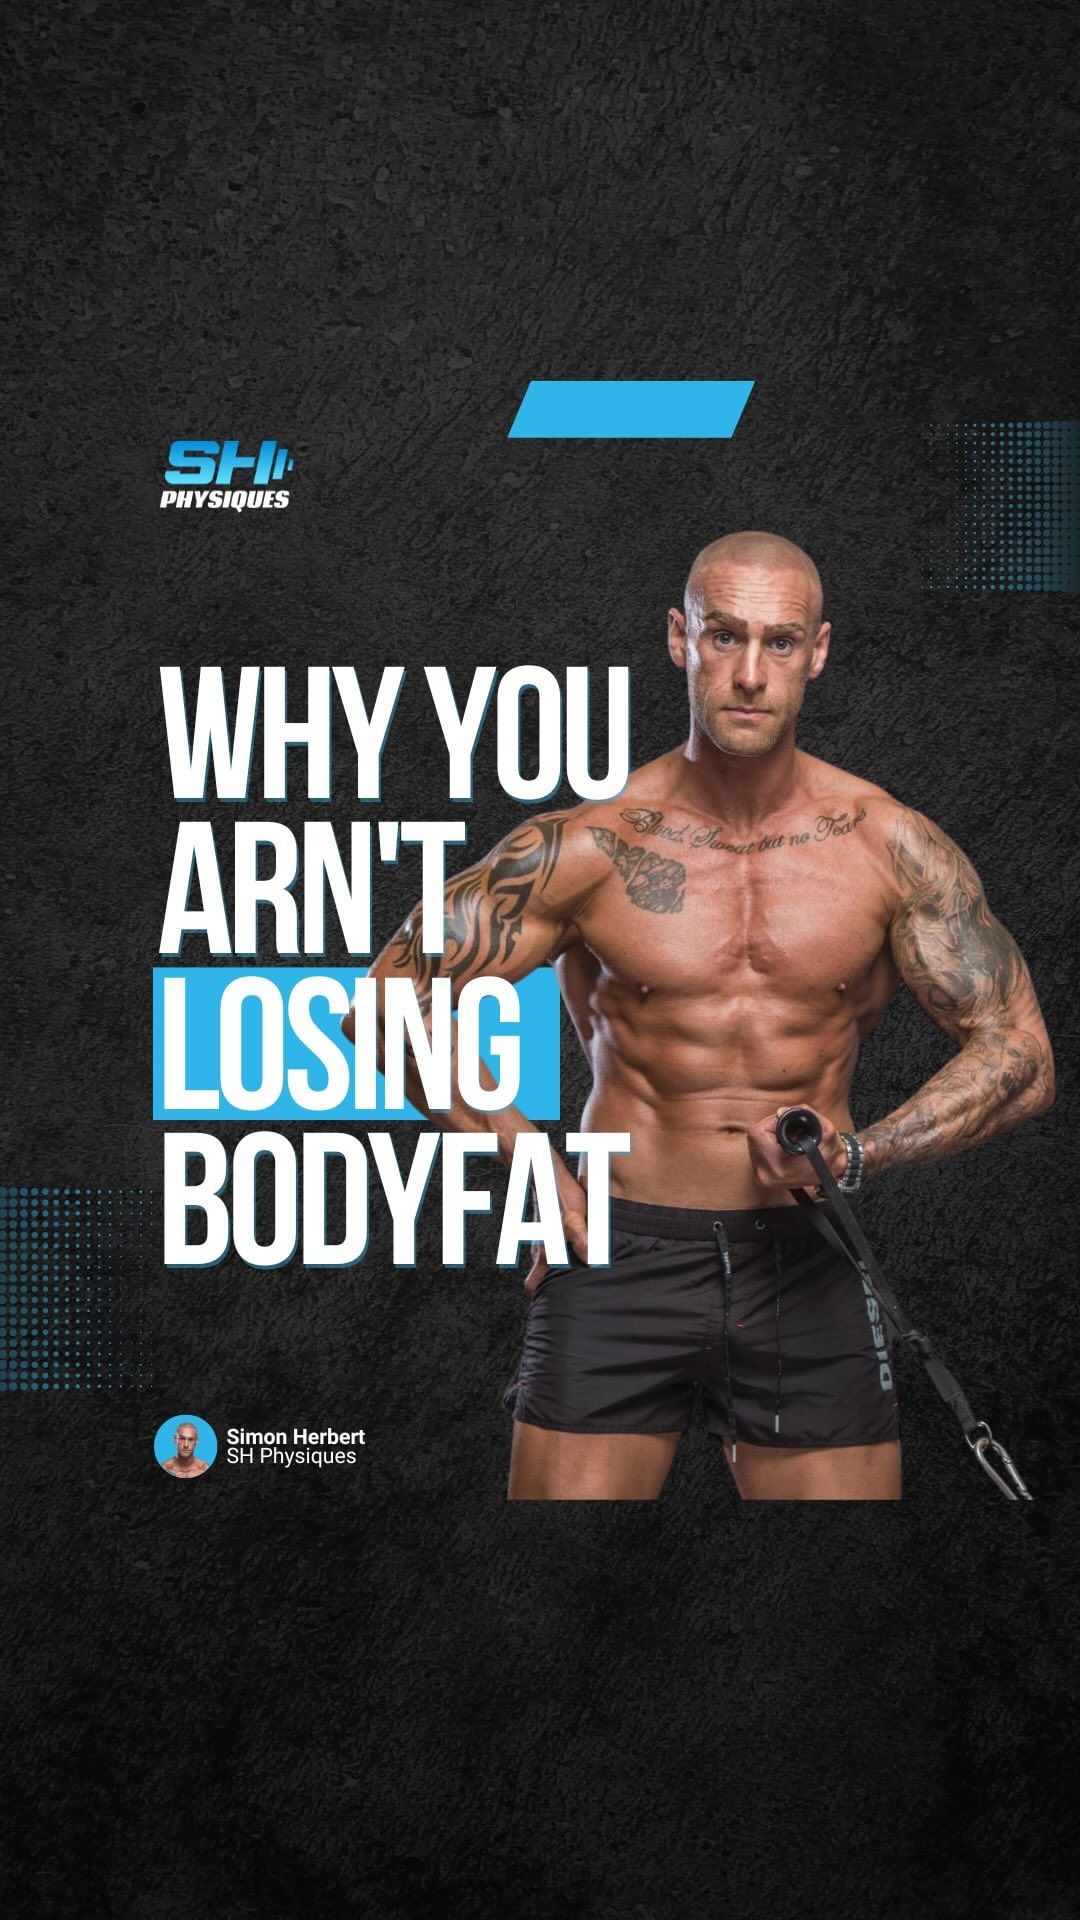 One of the top publications of @simonherbertfitness which has 14.3K likes and 121 comments